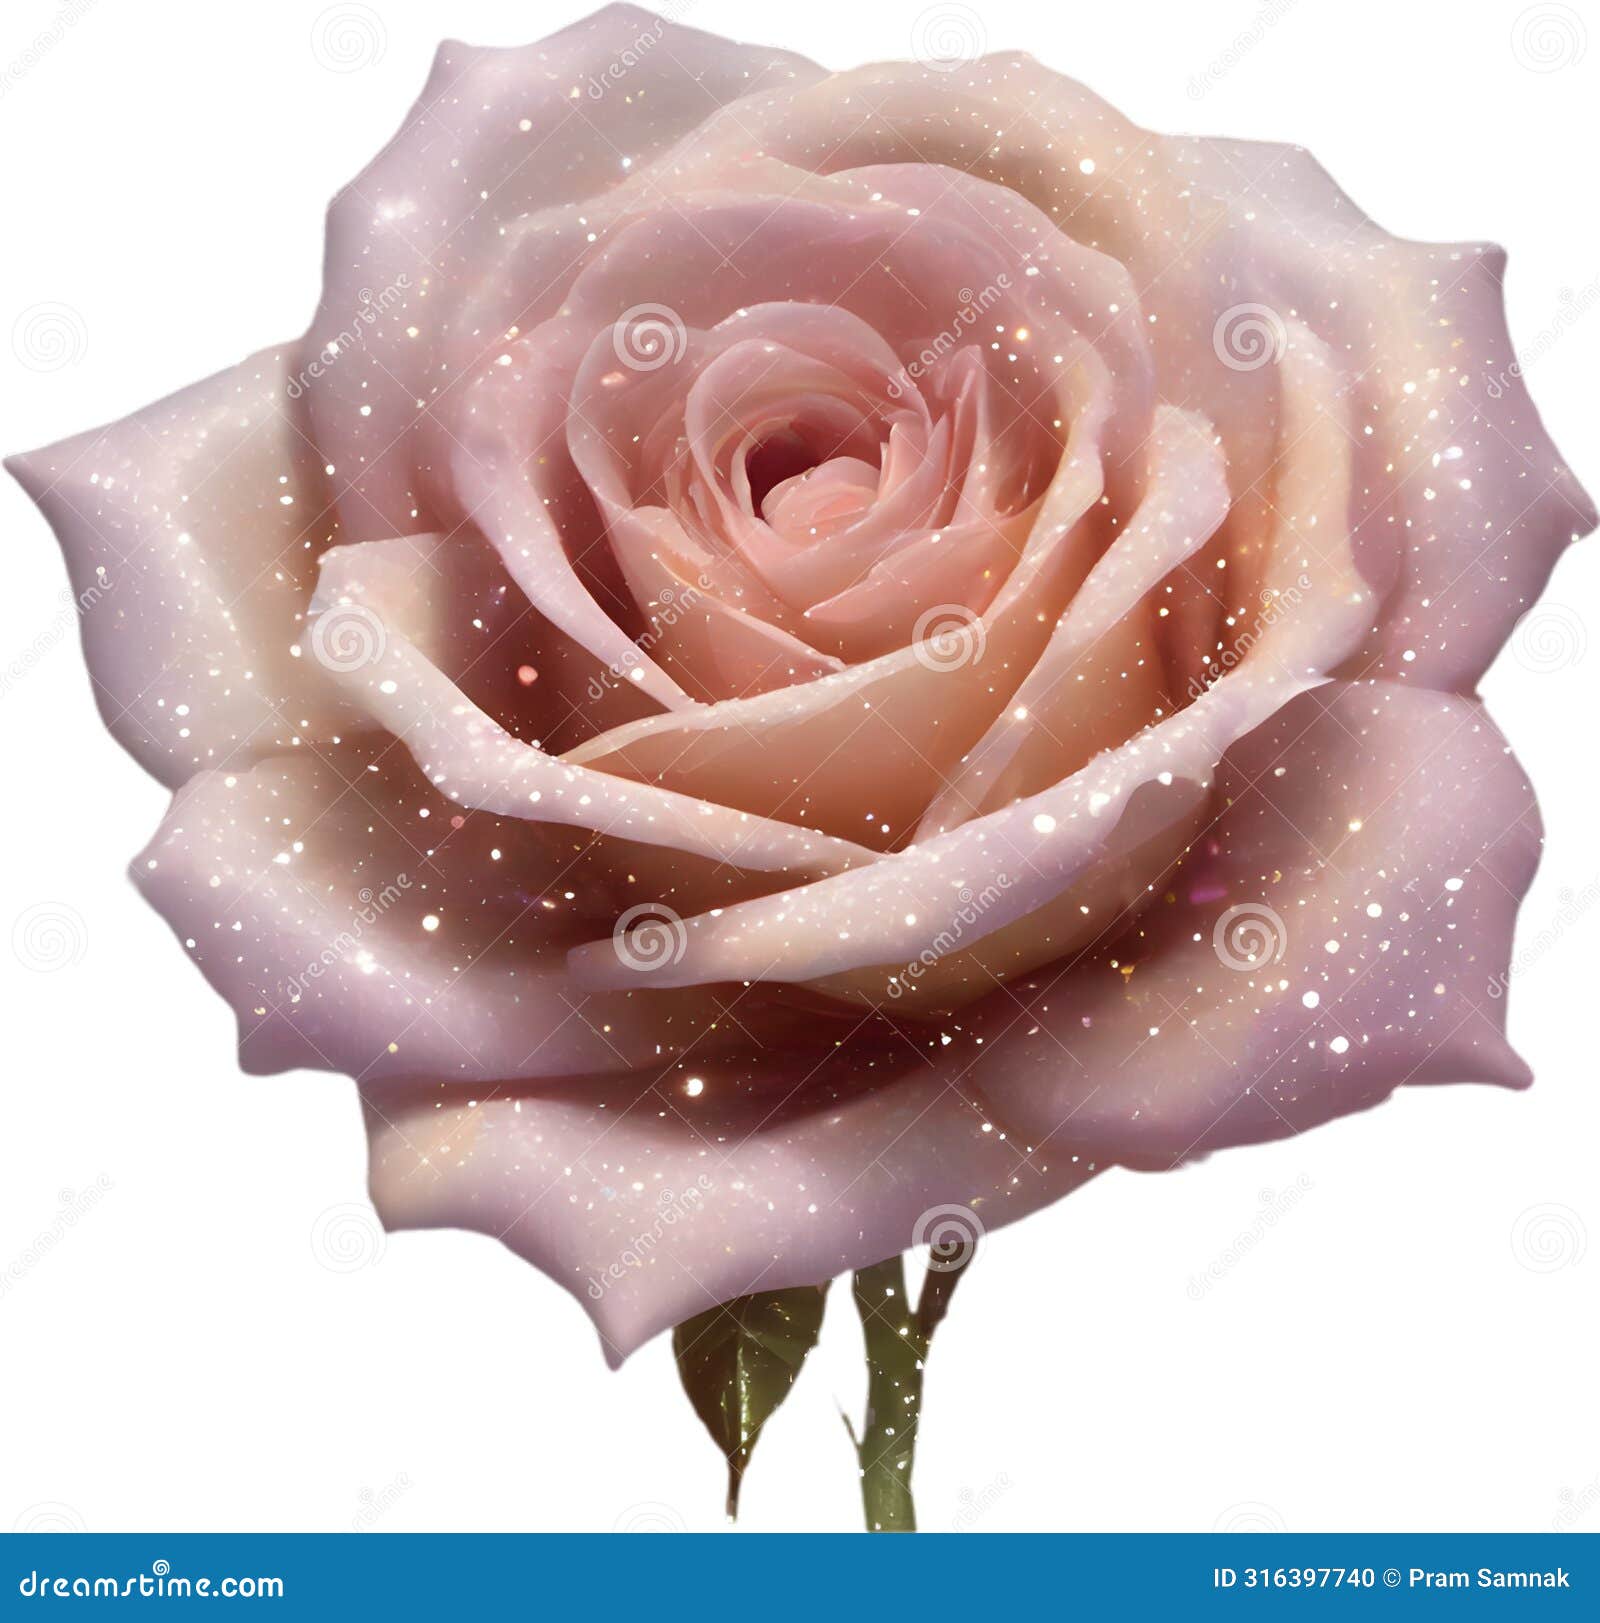 magical stardust rose of enchantment, stardust rose clipart for decoration.